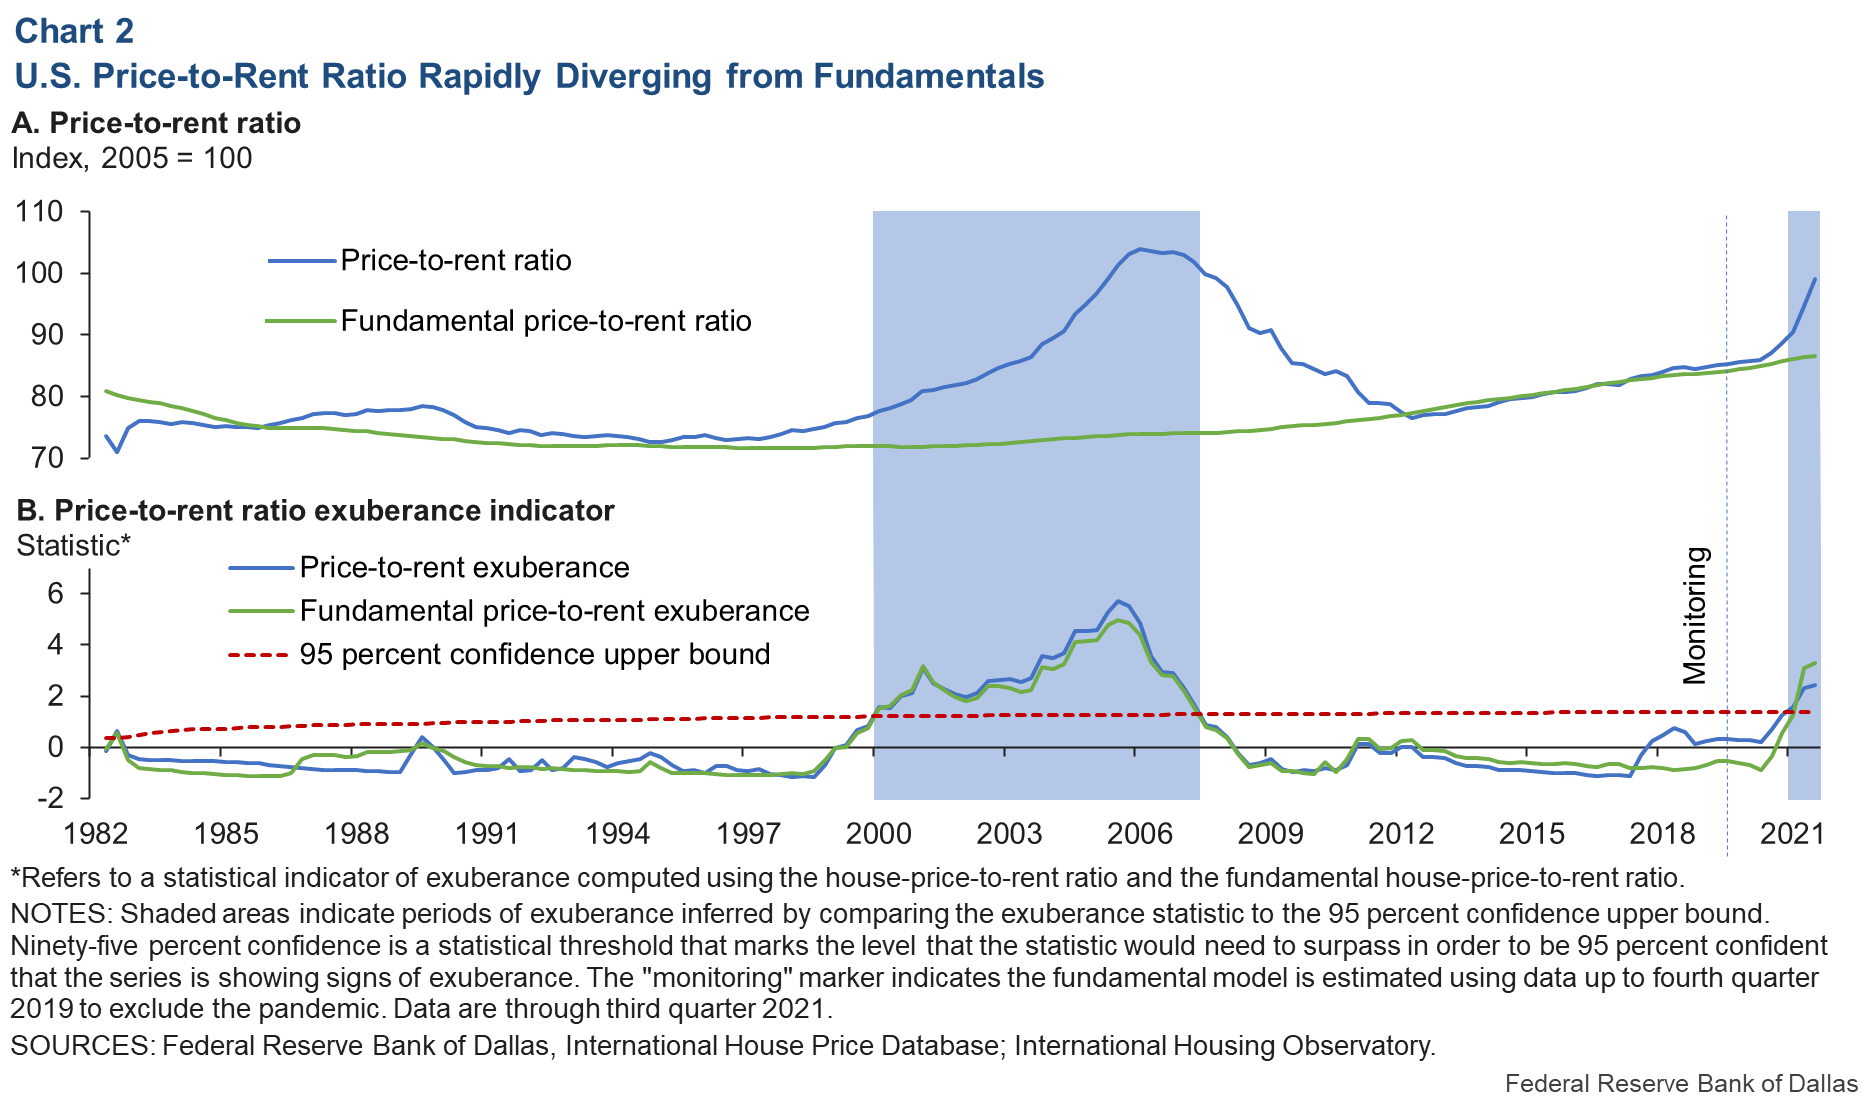 Chart 2: Price-to-Rent Ratio Rapidly Diverging from Fundamentals